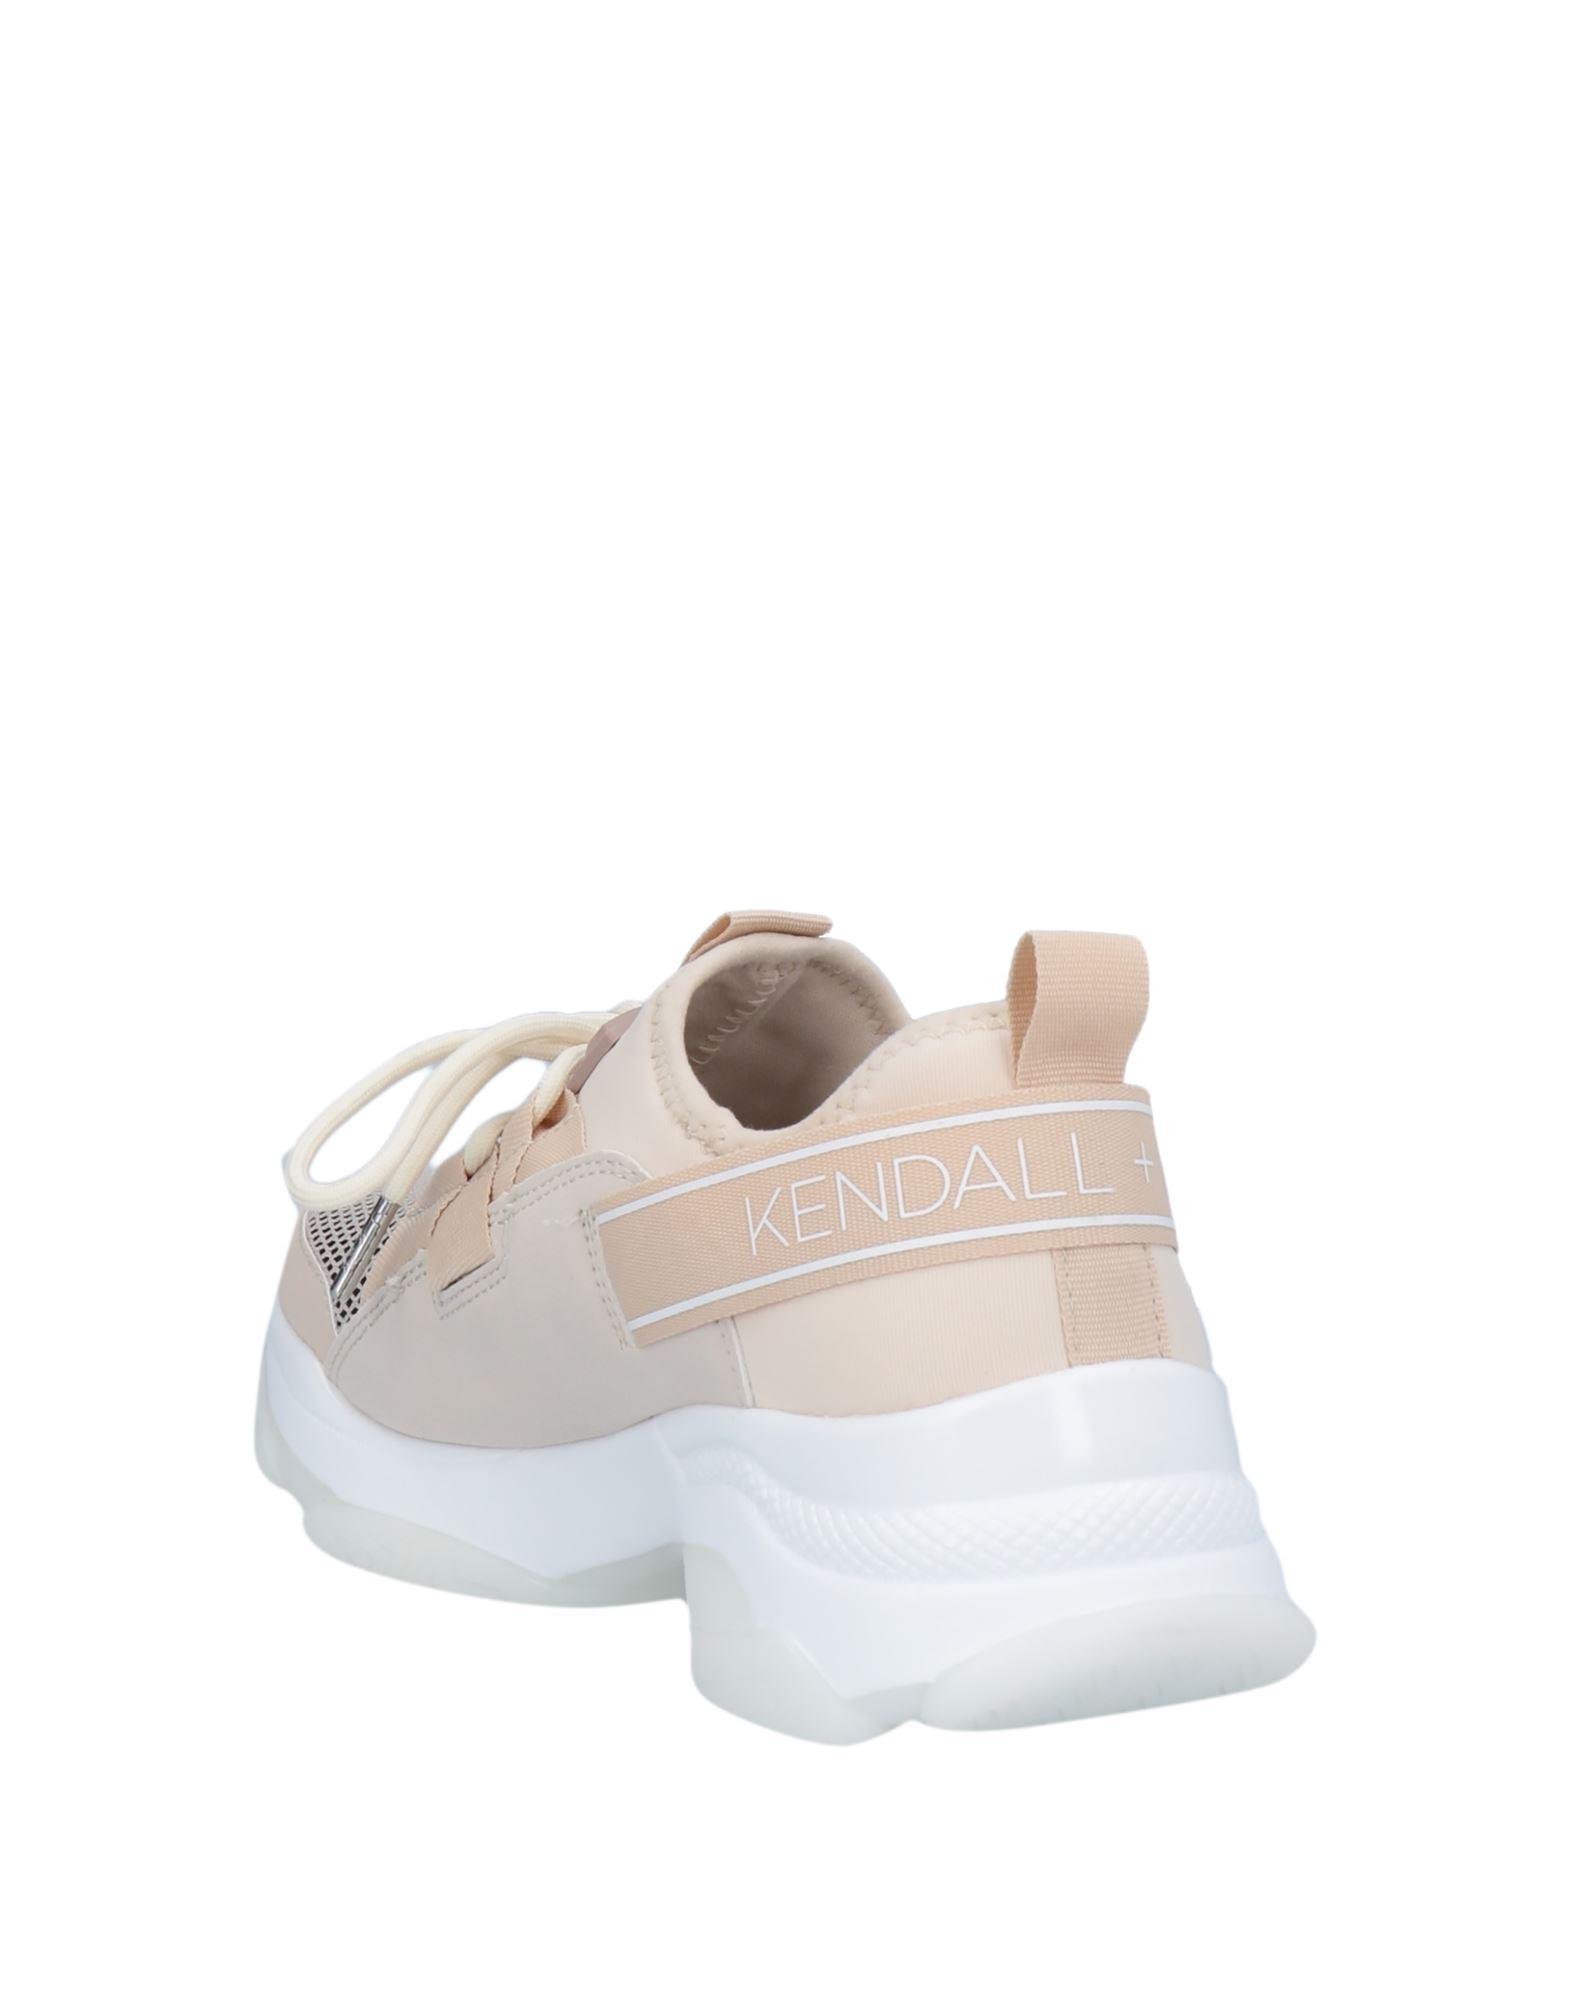 Kendall + Kylie Trainers in Beige (Natural) | Lyst